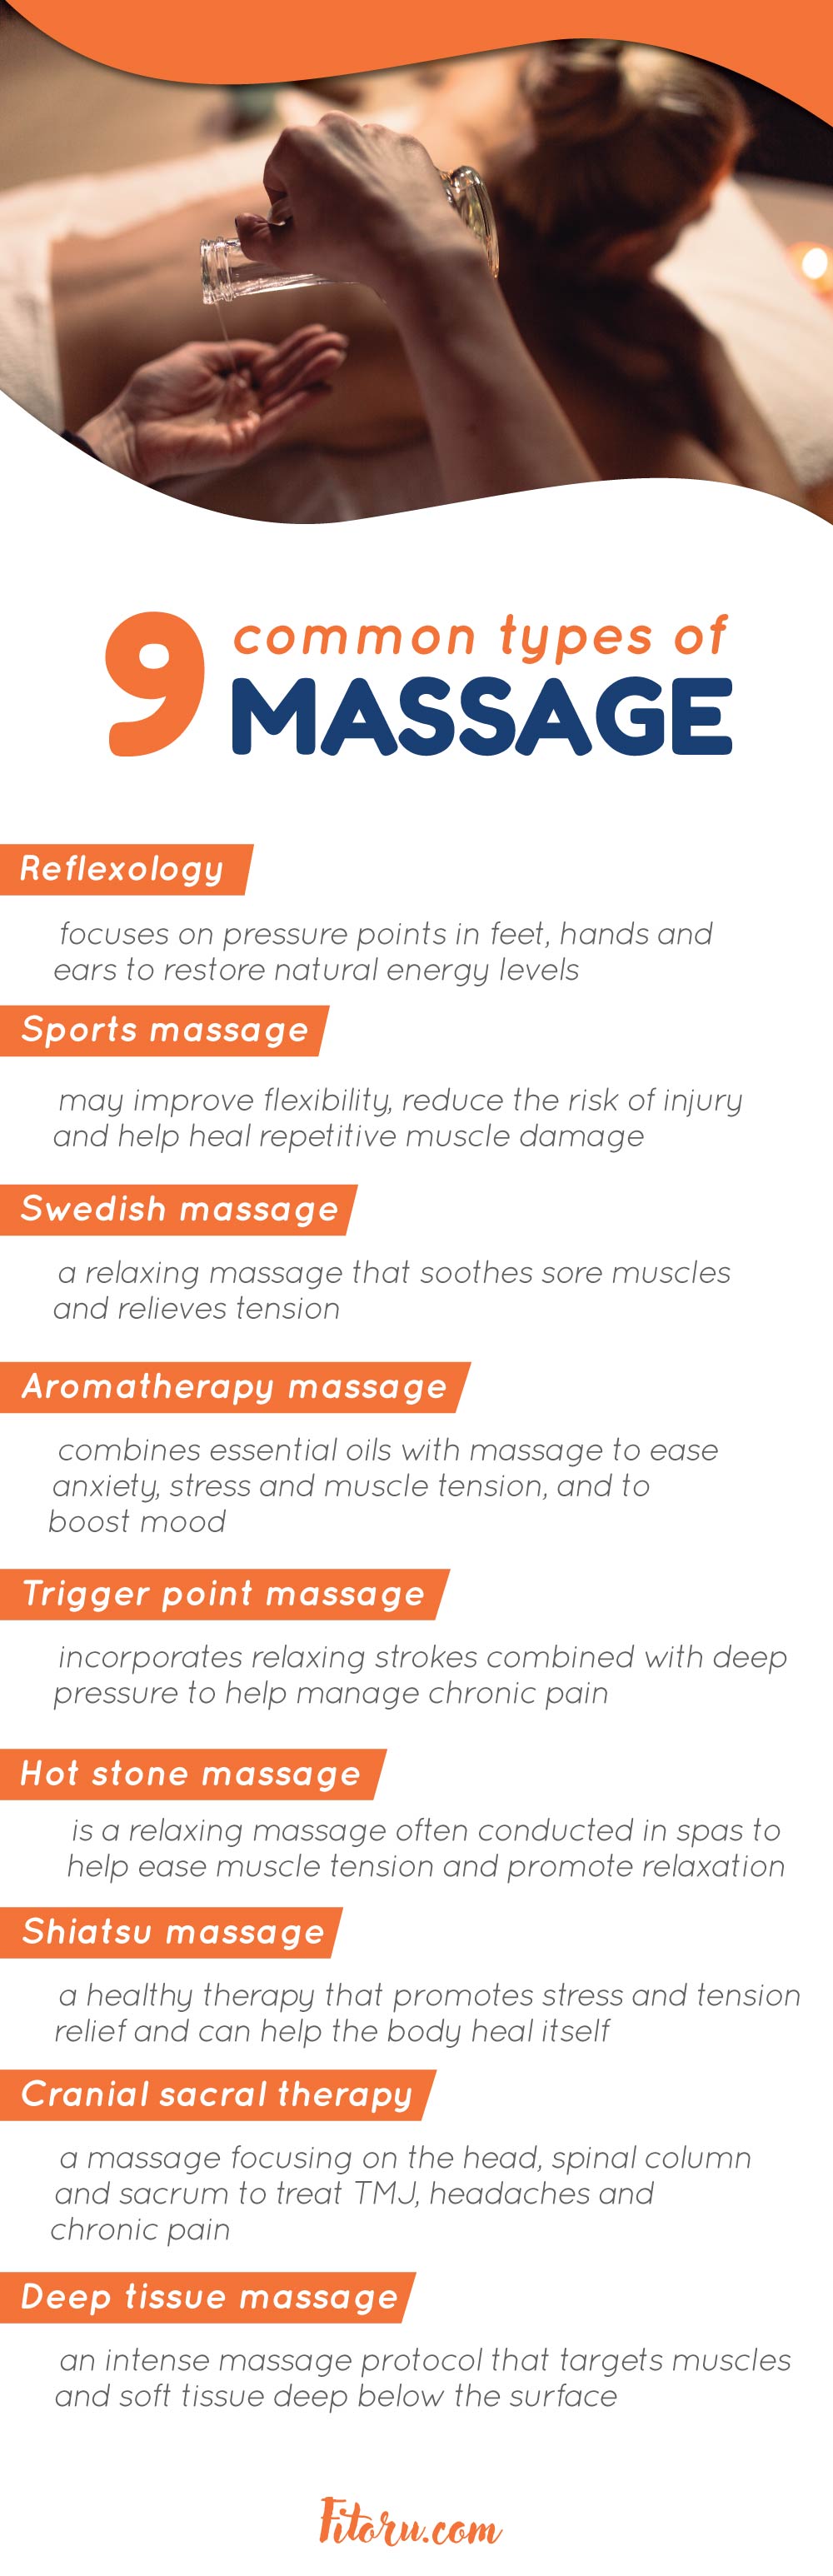 Here are 9 common types of massages.